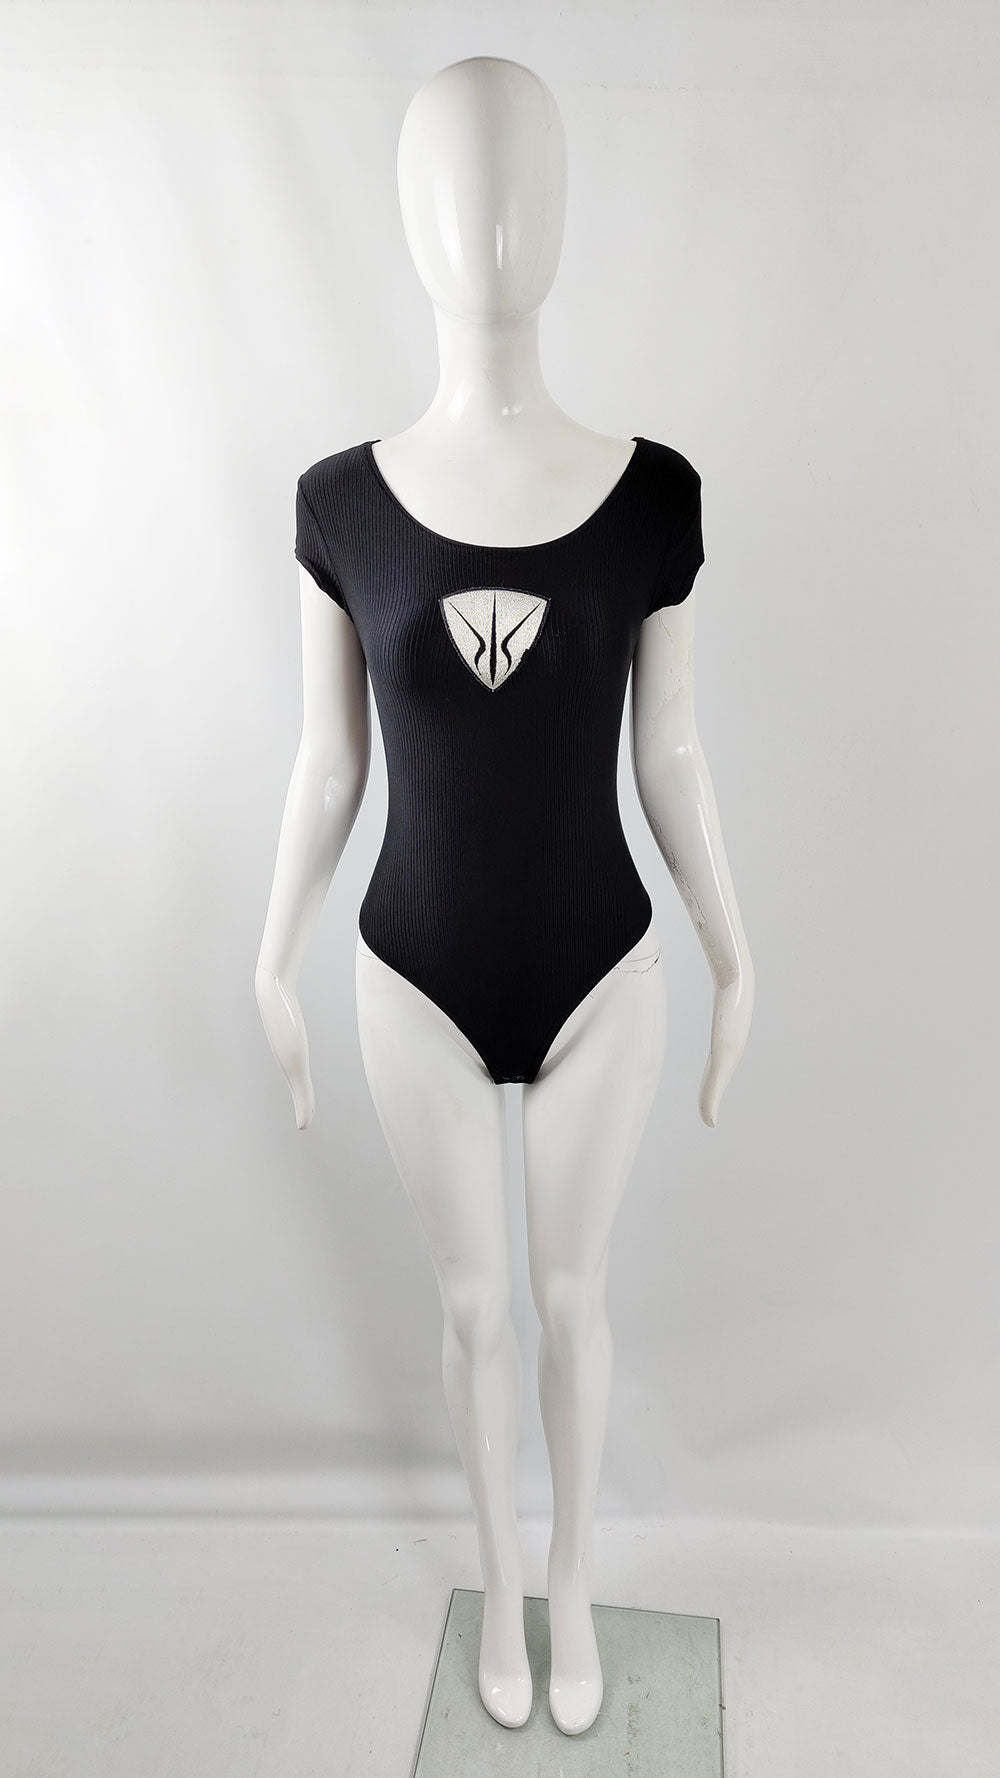 A vintage bodysuit from the 90s by British label, Nick Coleman for his Shield line.